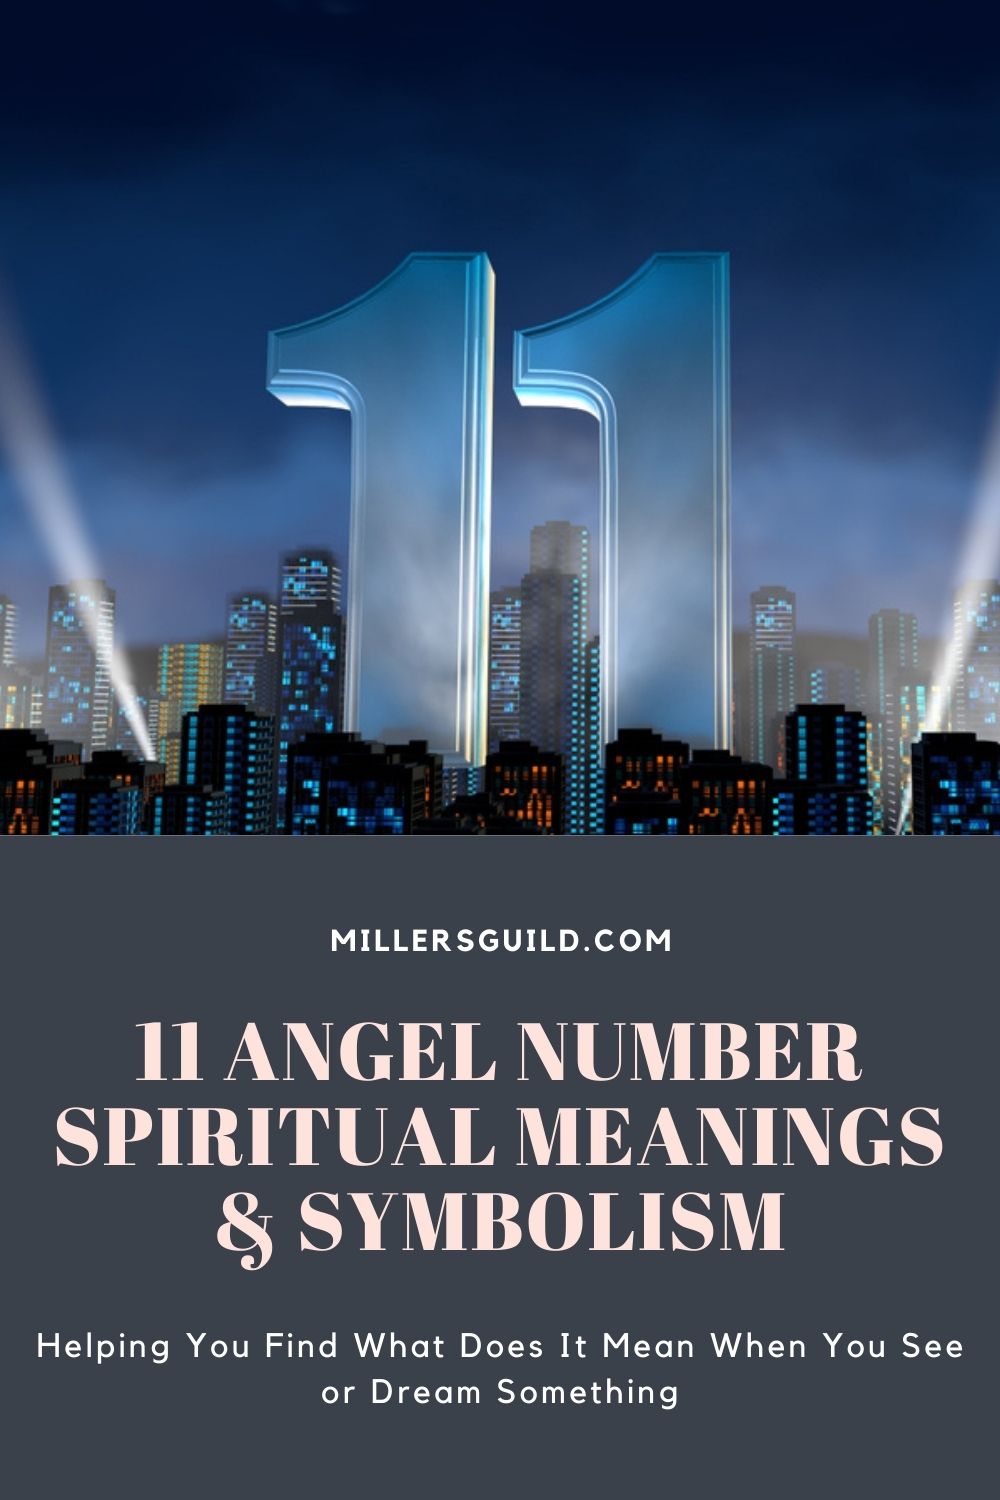 11 Angel Number Spiritual Meanings & Symbolism 2